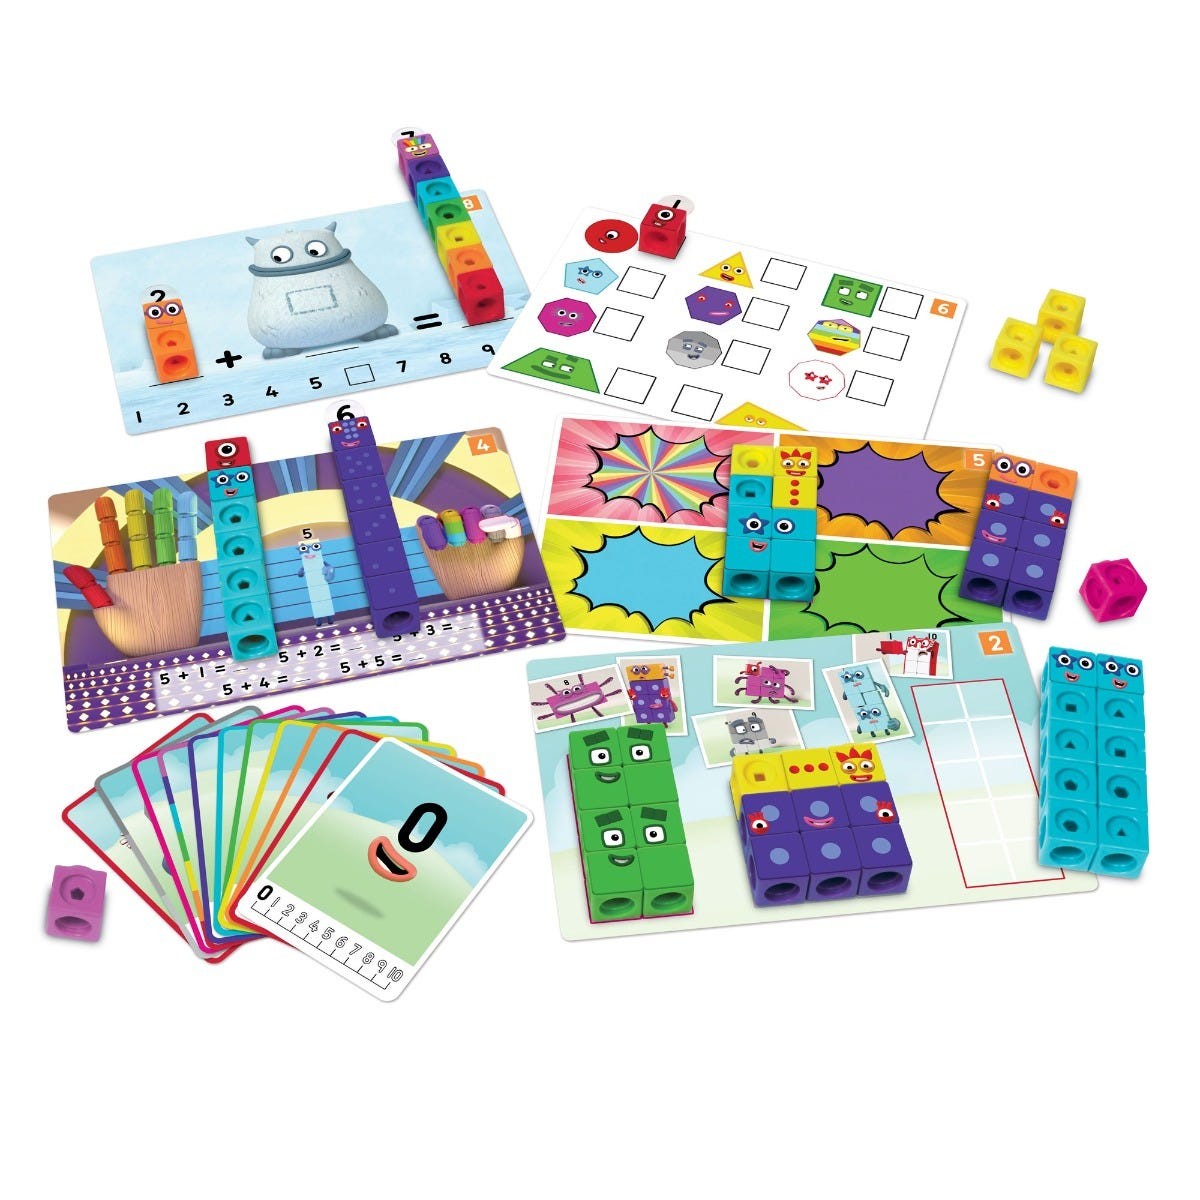 MathLink® Cubes Numberblocks 1-10 Activity Set - Early Years Maths Learning with CBeebies Characters